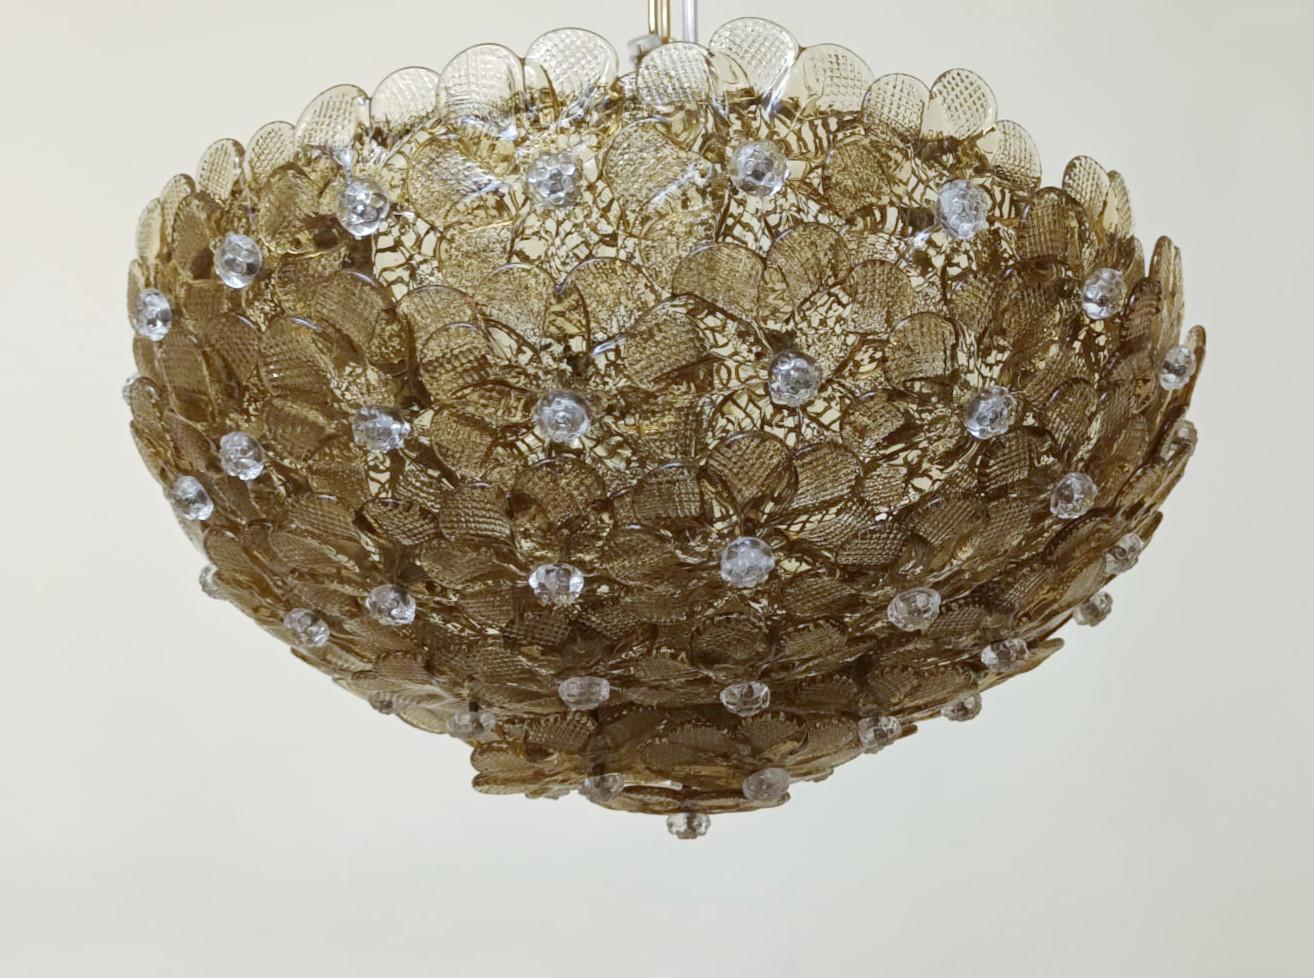 Vintage Italian flush mount with smoky hand blown Murano glass flowers / Made in Italy in the 1960s by Barovier e Toso
2 lights / E12 or E14 type / max 40W each
Measures: Diameter 13 inches / height 6 inches
1 available in stock in Italy
Order